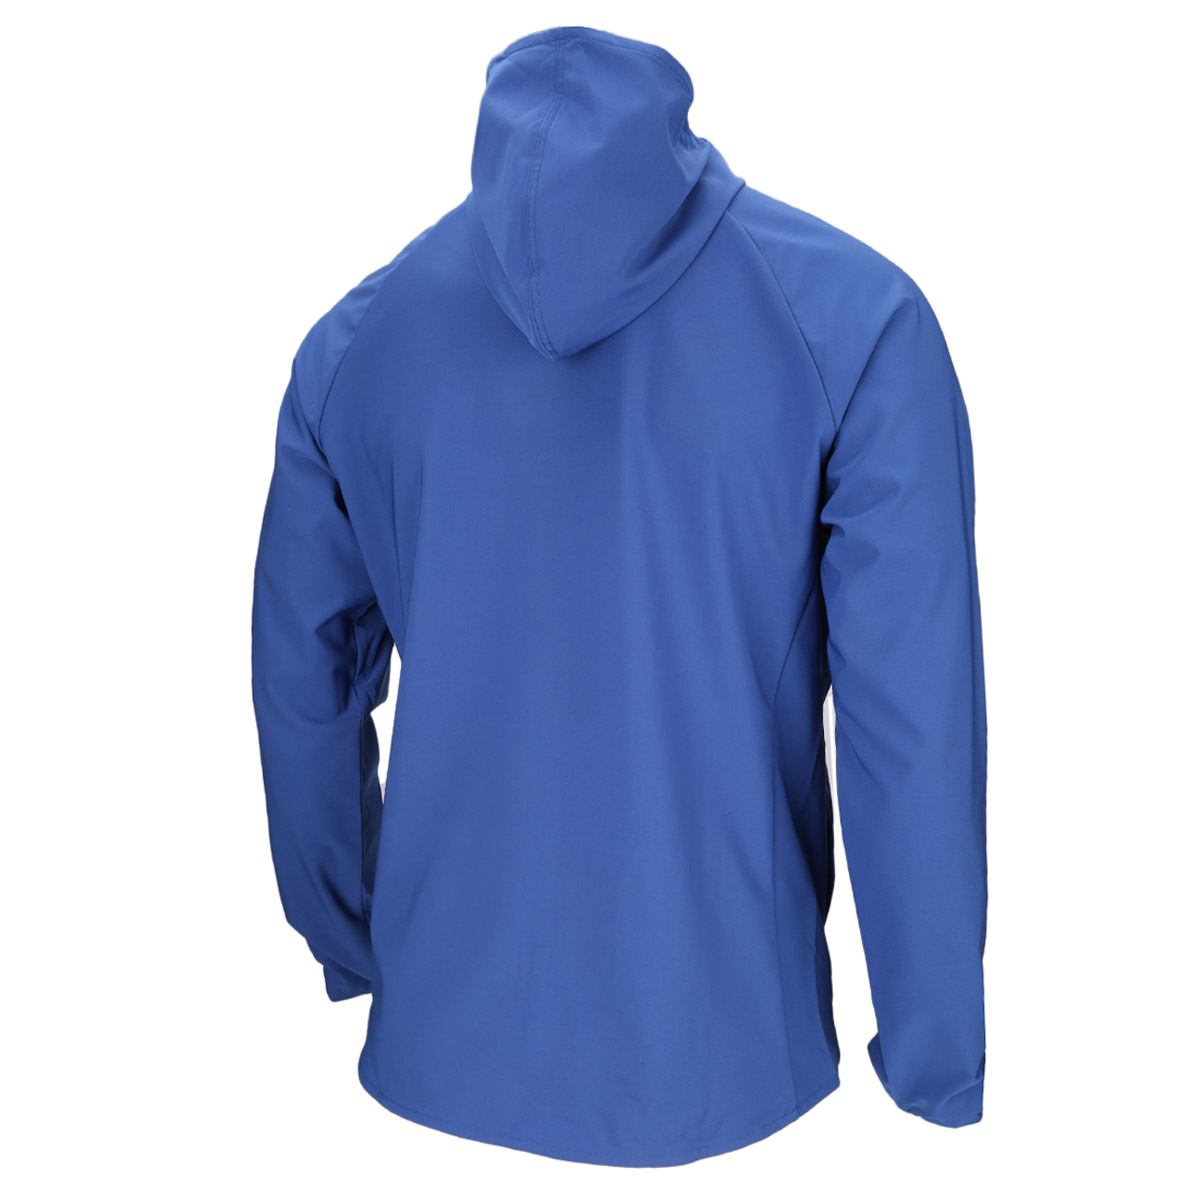 Campera Topper Training Pro,  image number null